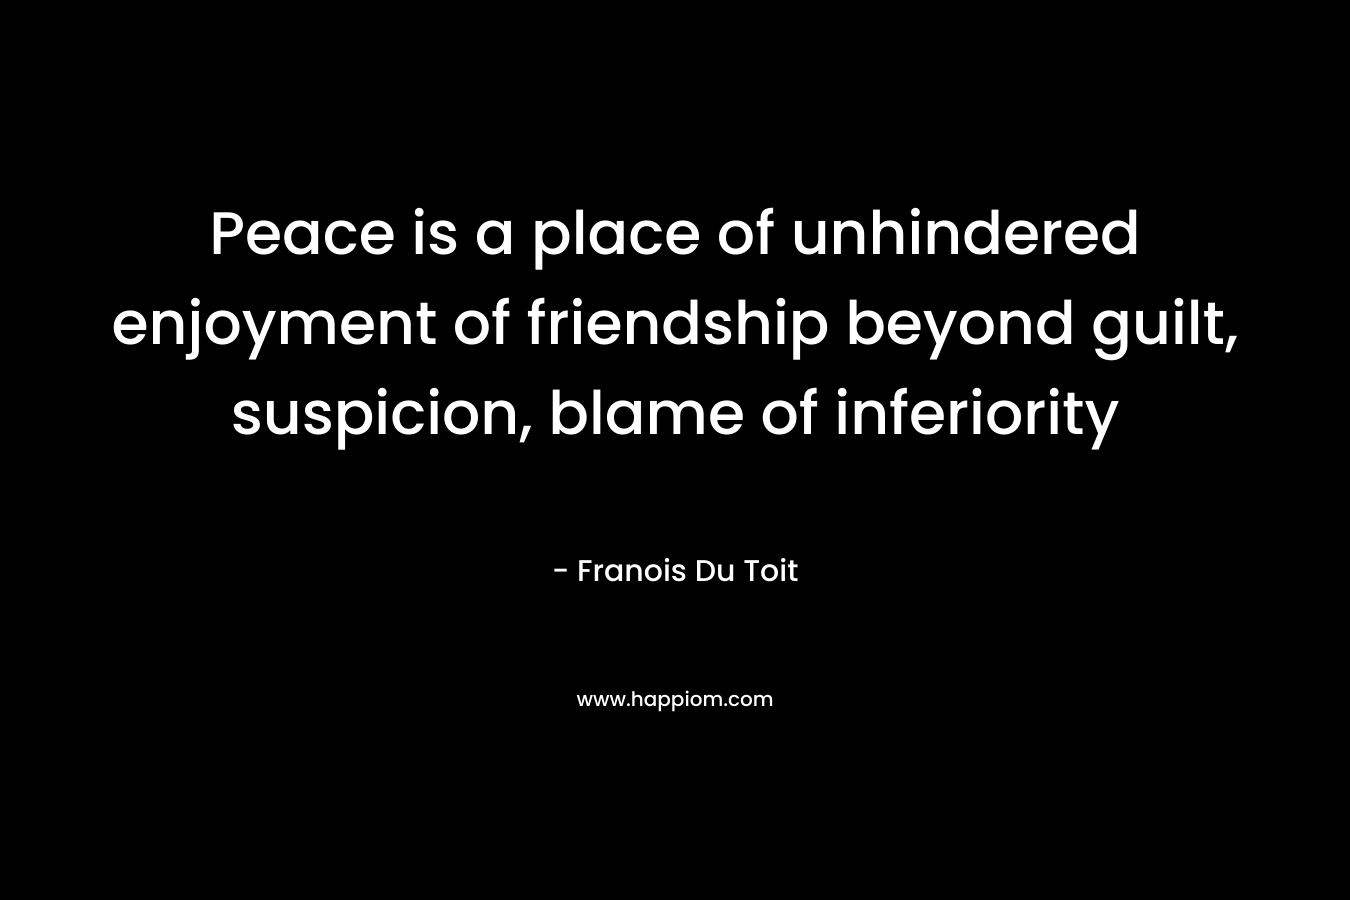 Peace is a place of unhindered enjoyment of friendship beyond guilt, suspicion, blame of inferiority – Franois Du Toit